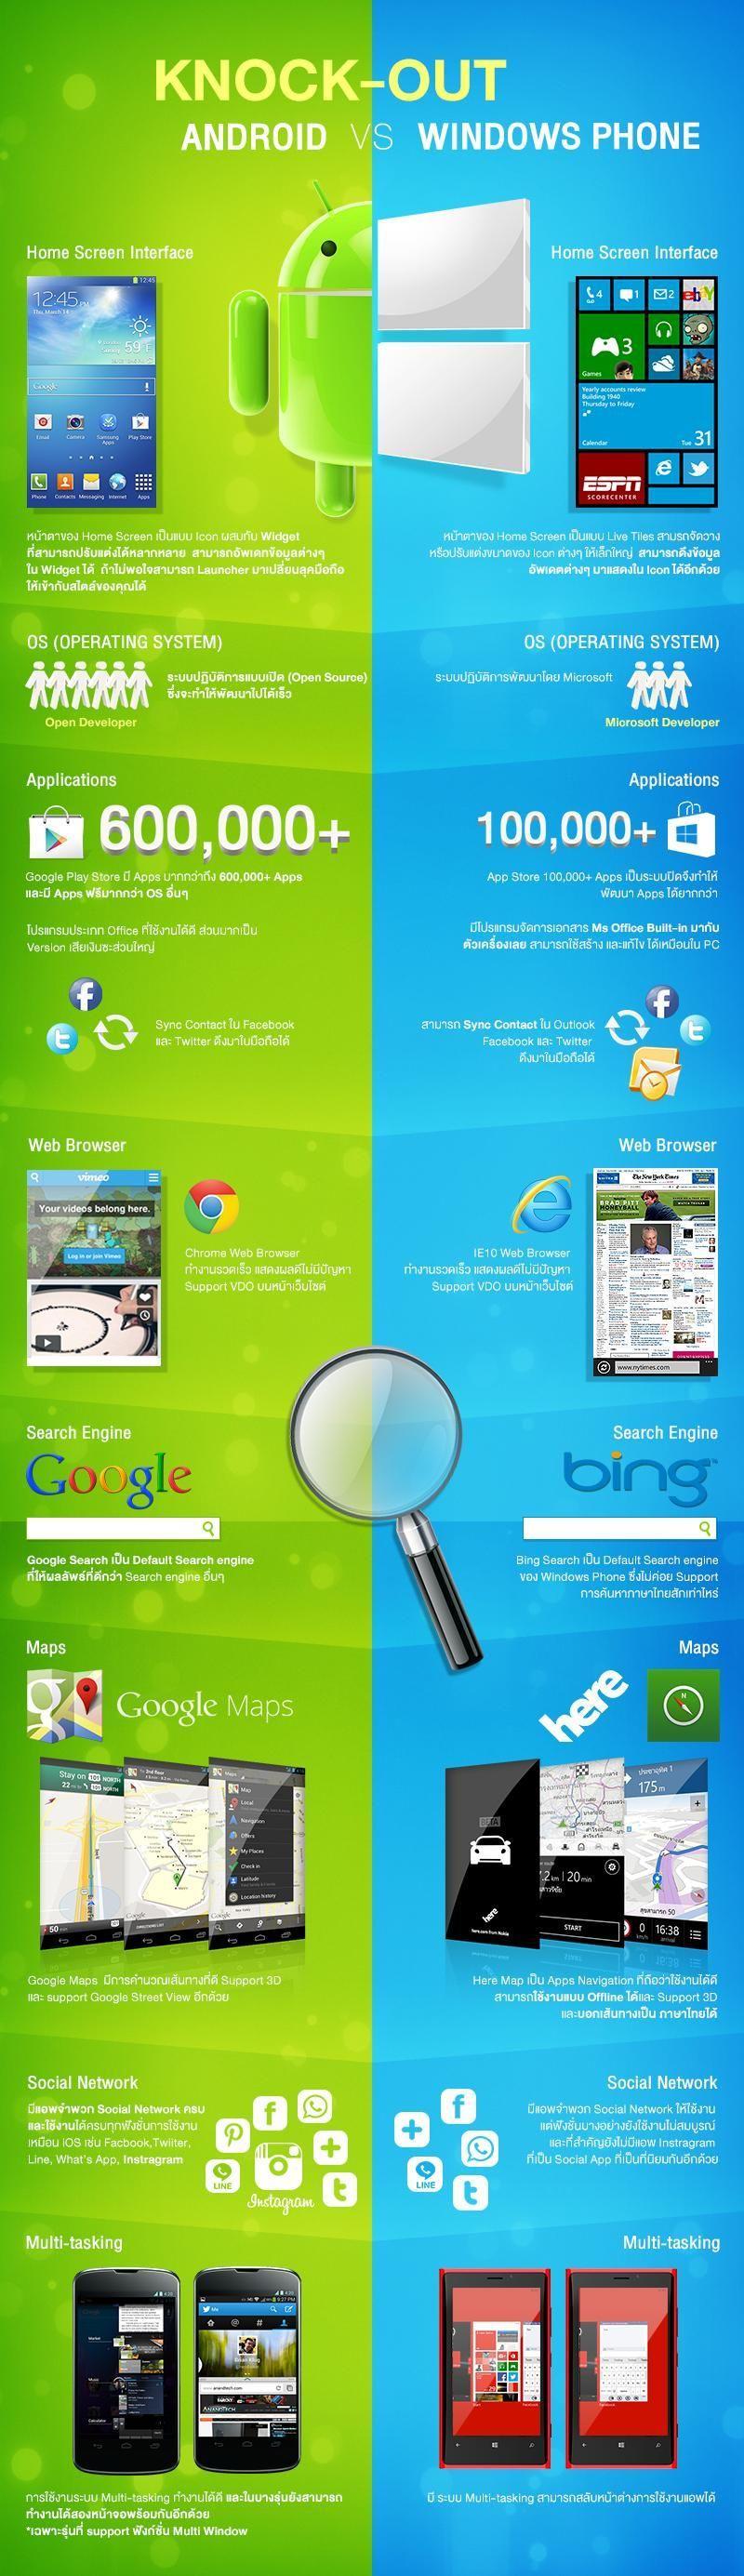 infographic_windows_android_final